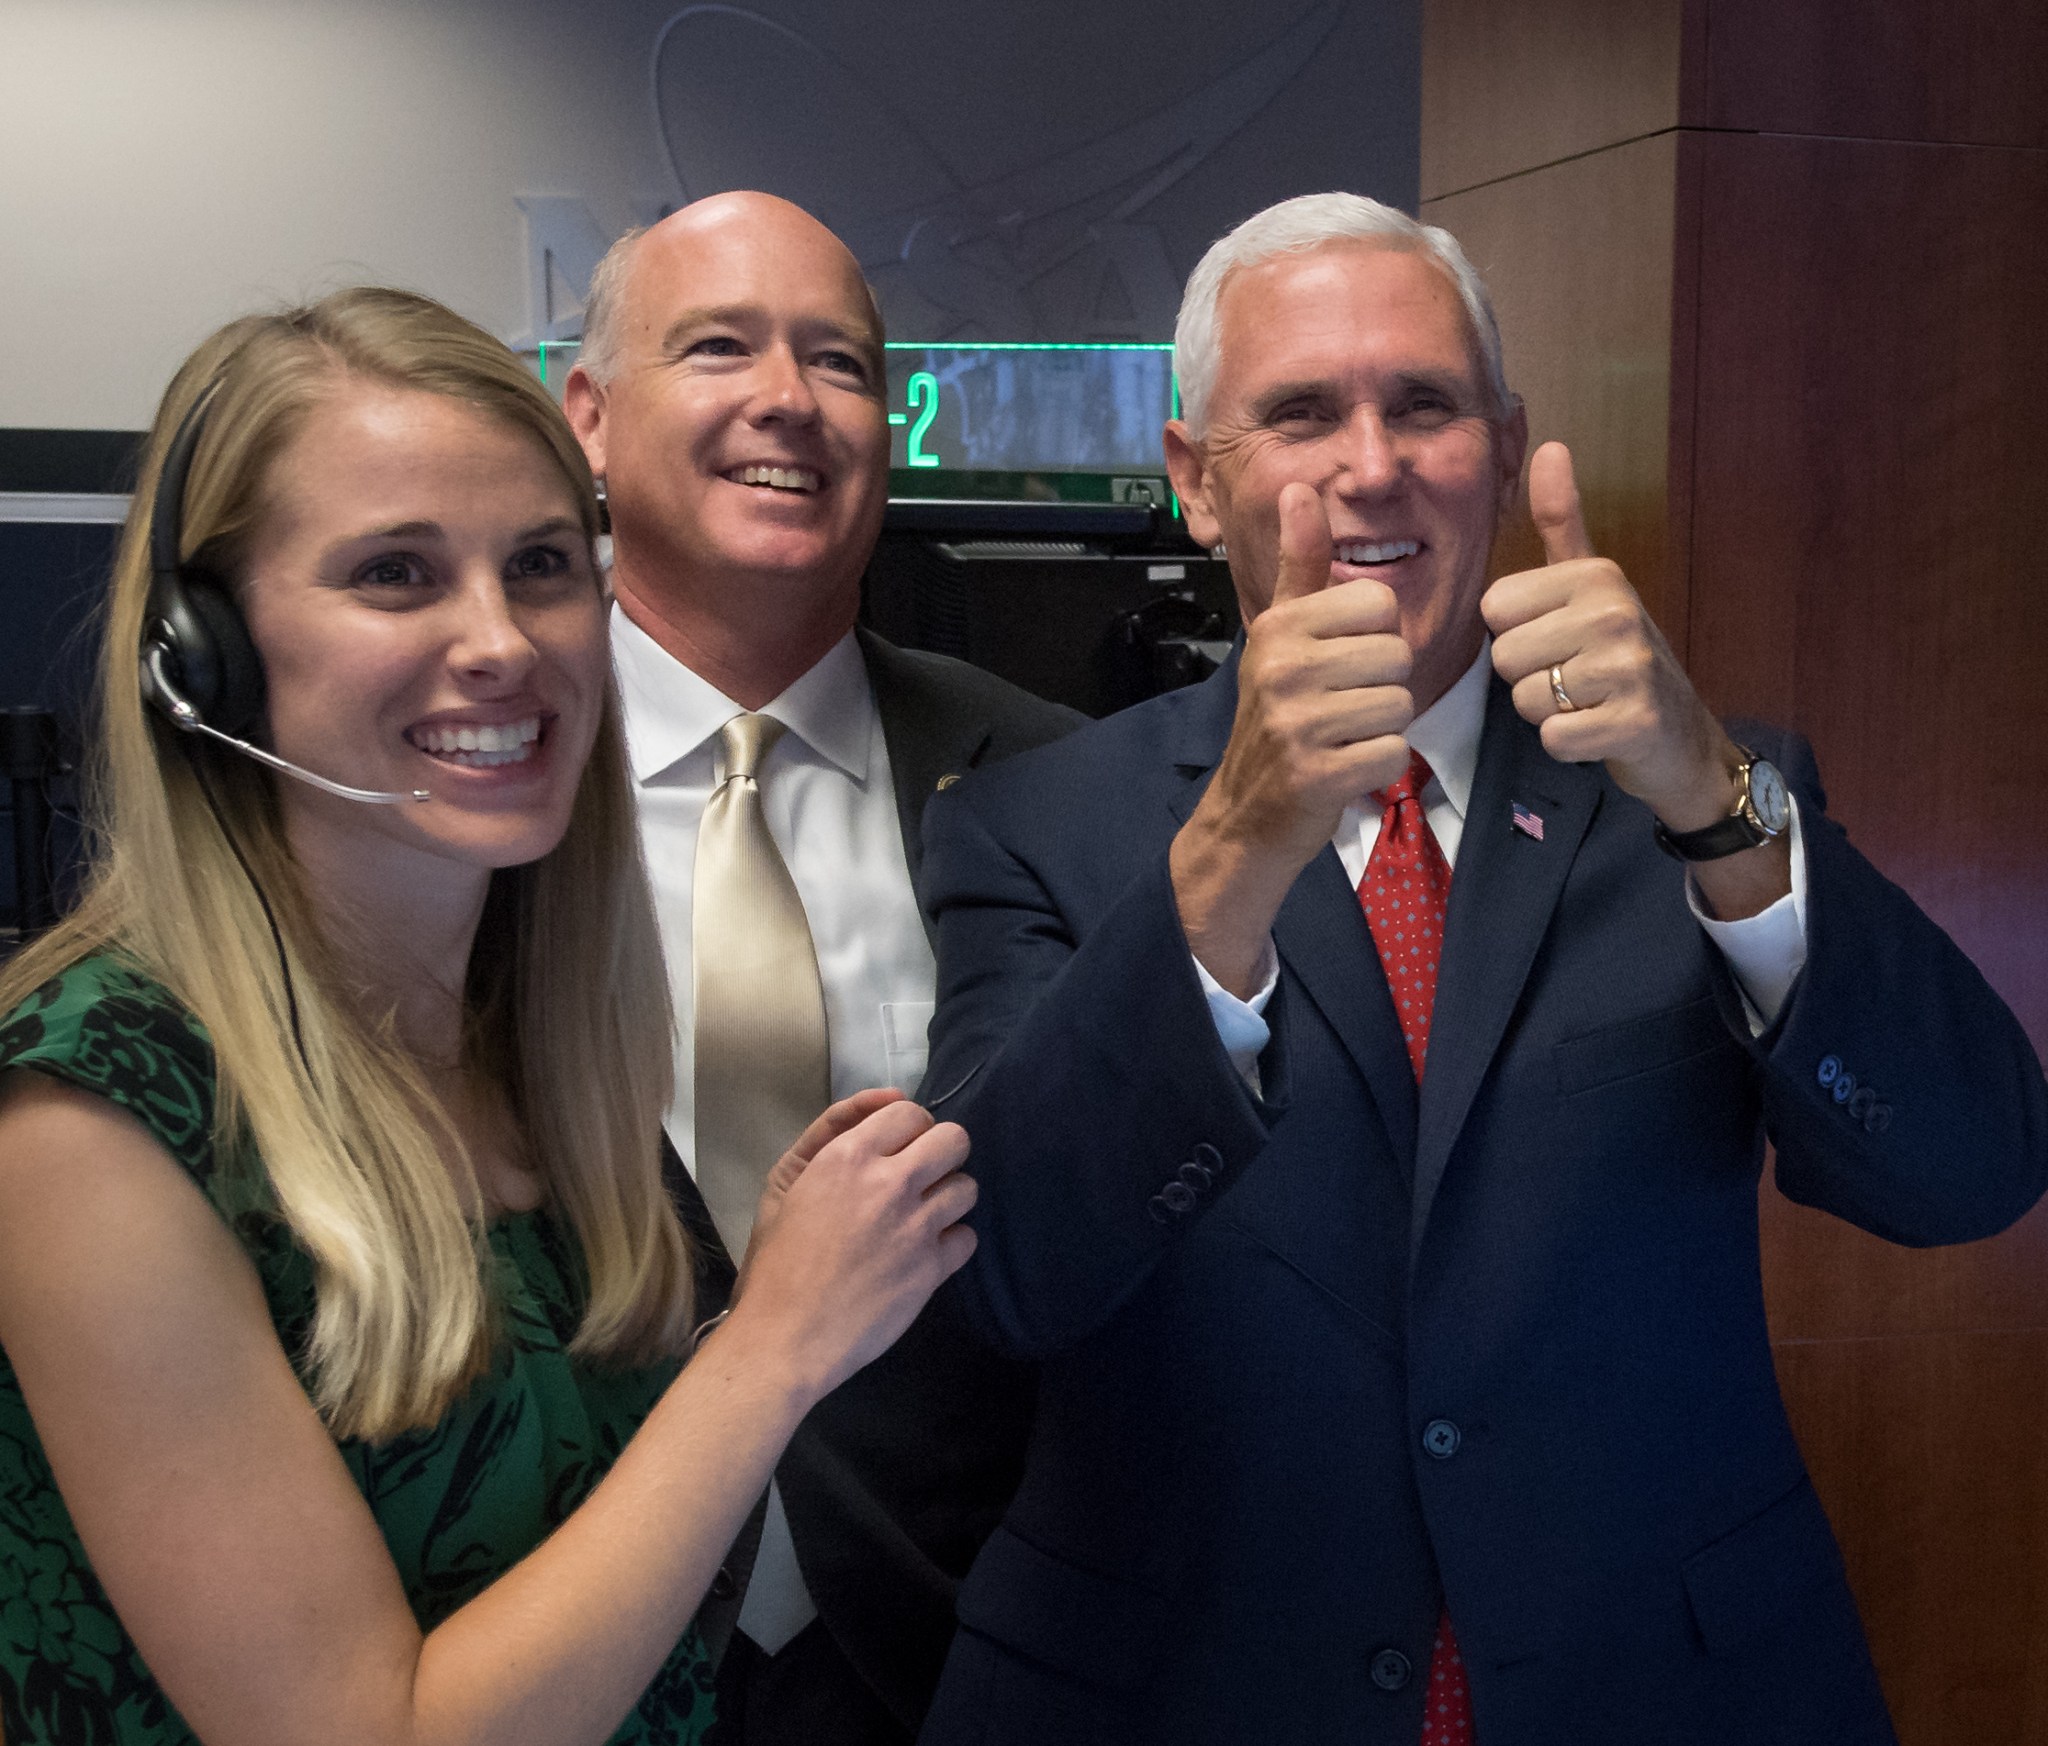 Jessica Duckworth, left, U.S. Rep. Robert Aderholt of Alabama, center, and Vice President Mike Pence.